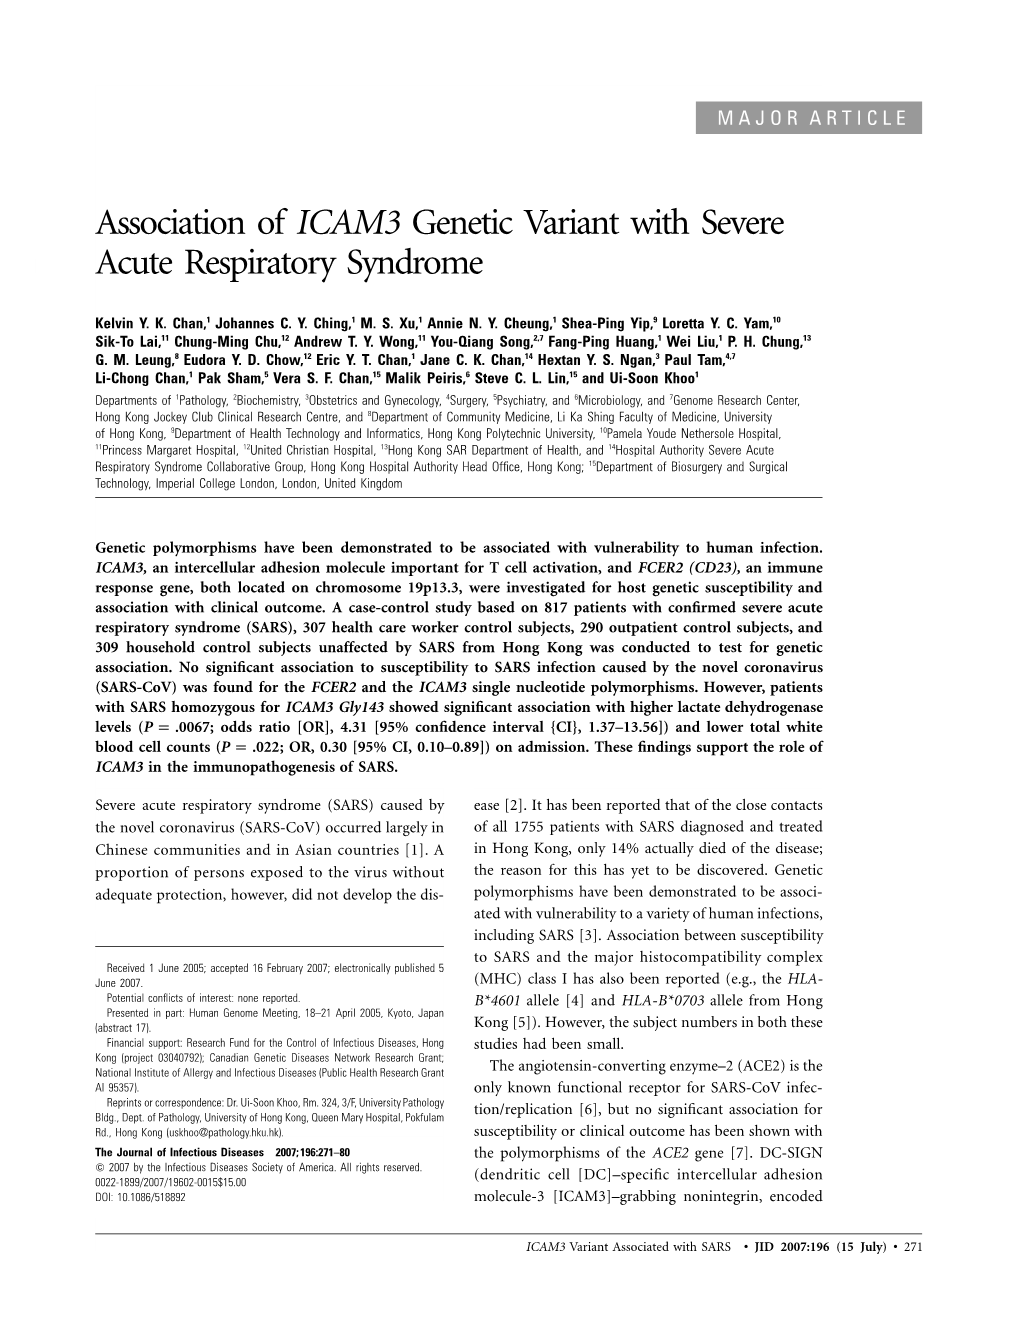 Association of ICAM3 Genetic Variant with Severe Acute Respiratory Syndrome